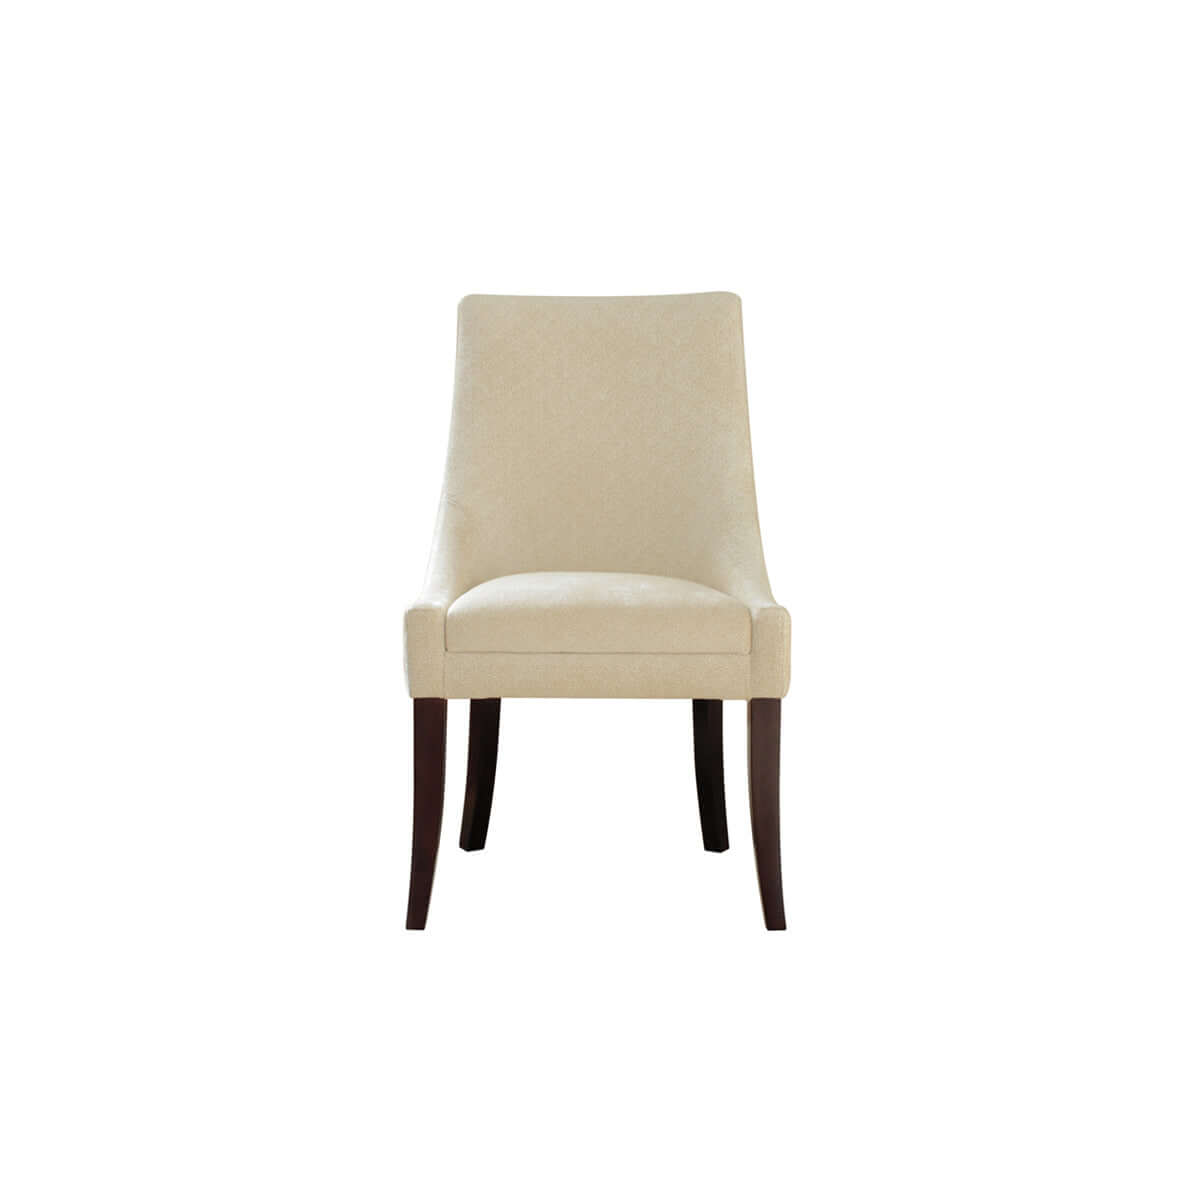 classy and simple dining room chair front view